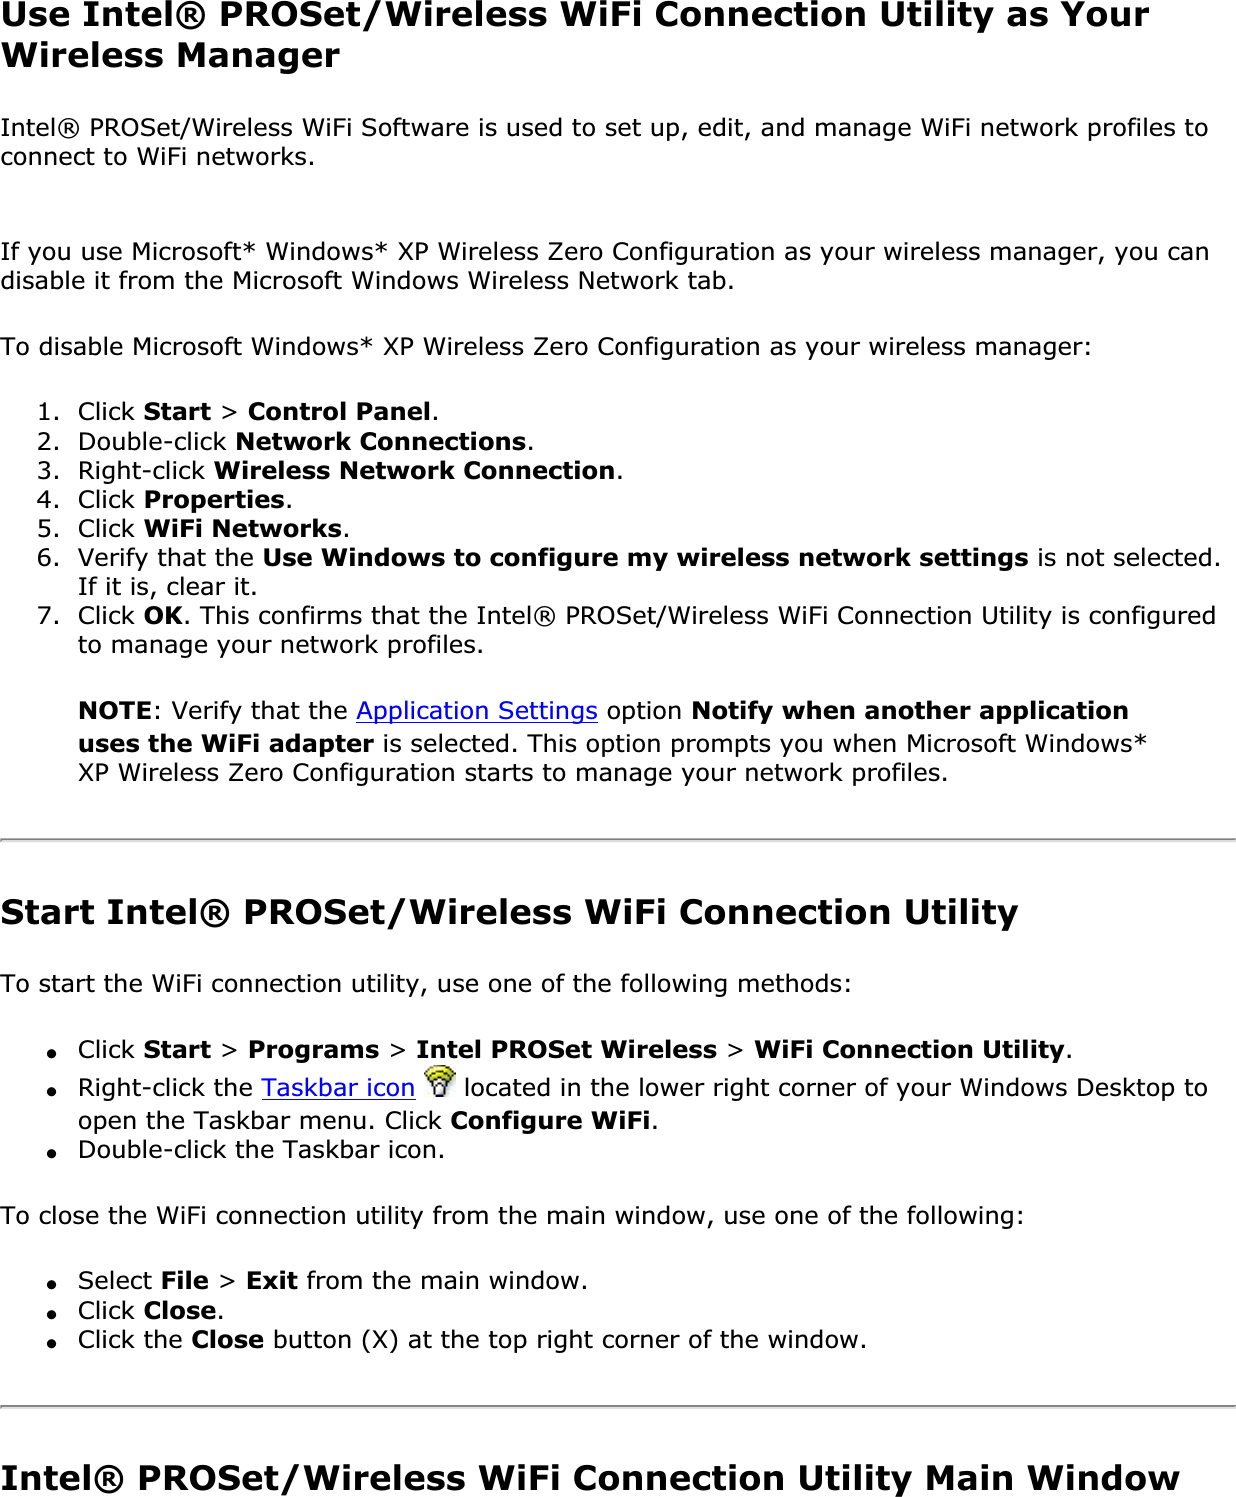 Use Intel® PROSet/Wireless WiFi Connection Utility as Your Wireless ManagerIntel® PROSet/Wireless WiFi Software is used to set up, edit, and manage WiFi network profiles to connect to WiFi networks. If you use Microsoft* Windows* XP Wireless Zero Configuration as your wireless manager, you can disable it from the Microsoft Windows Wireless Network tab.To disable Microsoft Windows* XP Wireless Zero Configuration as your wireless manager:1.  Click Start &gt; Control Panel.2.  Double-click Network Connections.3.  Right-click Wireless Network Connection.4.  Click Properties.5.  Click WiFi Networks.6.  Verify that the Use Windows to configure my wireless network settings is not selected. If it is, clear it.7.  Click OK. This confirms that the Intel® PROSet/Wireless WiFi Connection Utility is configured to manage your network profiles.NOTE: Verify that the Application Settings option Notify when another application uses the WiFi adapter is selected. This option prompts you when Microsoft Windows* XP Wireless Zero Configuration starts to manage your network profiles.Start Intel® PROSet/Wireless WiFi Connection UtilityTo start the WiFi connection utility, use one of the following methods:●Click Start &gt; Programs &gt; Intel PROSet Wireless &gt; WiFi Connection Utility.●Right-click the Taskbar icon  located in the lower right corner of your Windows Desktop to open the Taskbar menu. Click Configure WiFi.●Double-click the Taskbar icon.To close the WiFi connection utility from the main window, use one of the following:●Select File &gt; Exit from the main window.●Click Close.●Click the Close button (X) at the top right corner of the window.Intel® PROSet/Wireless WiFi Connection Utility Main Window